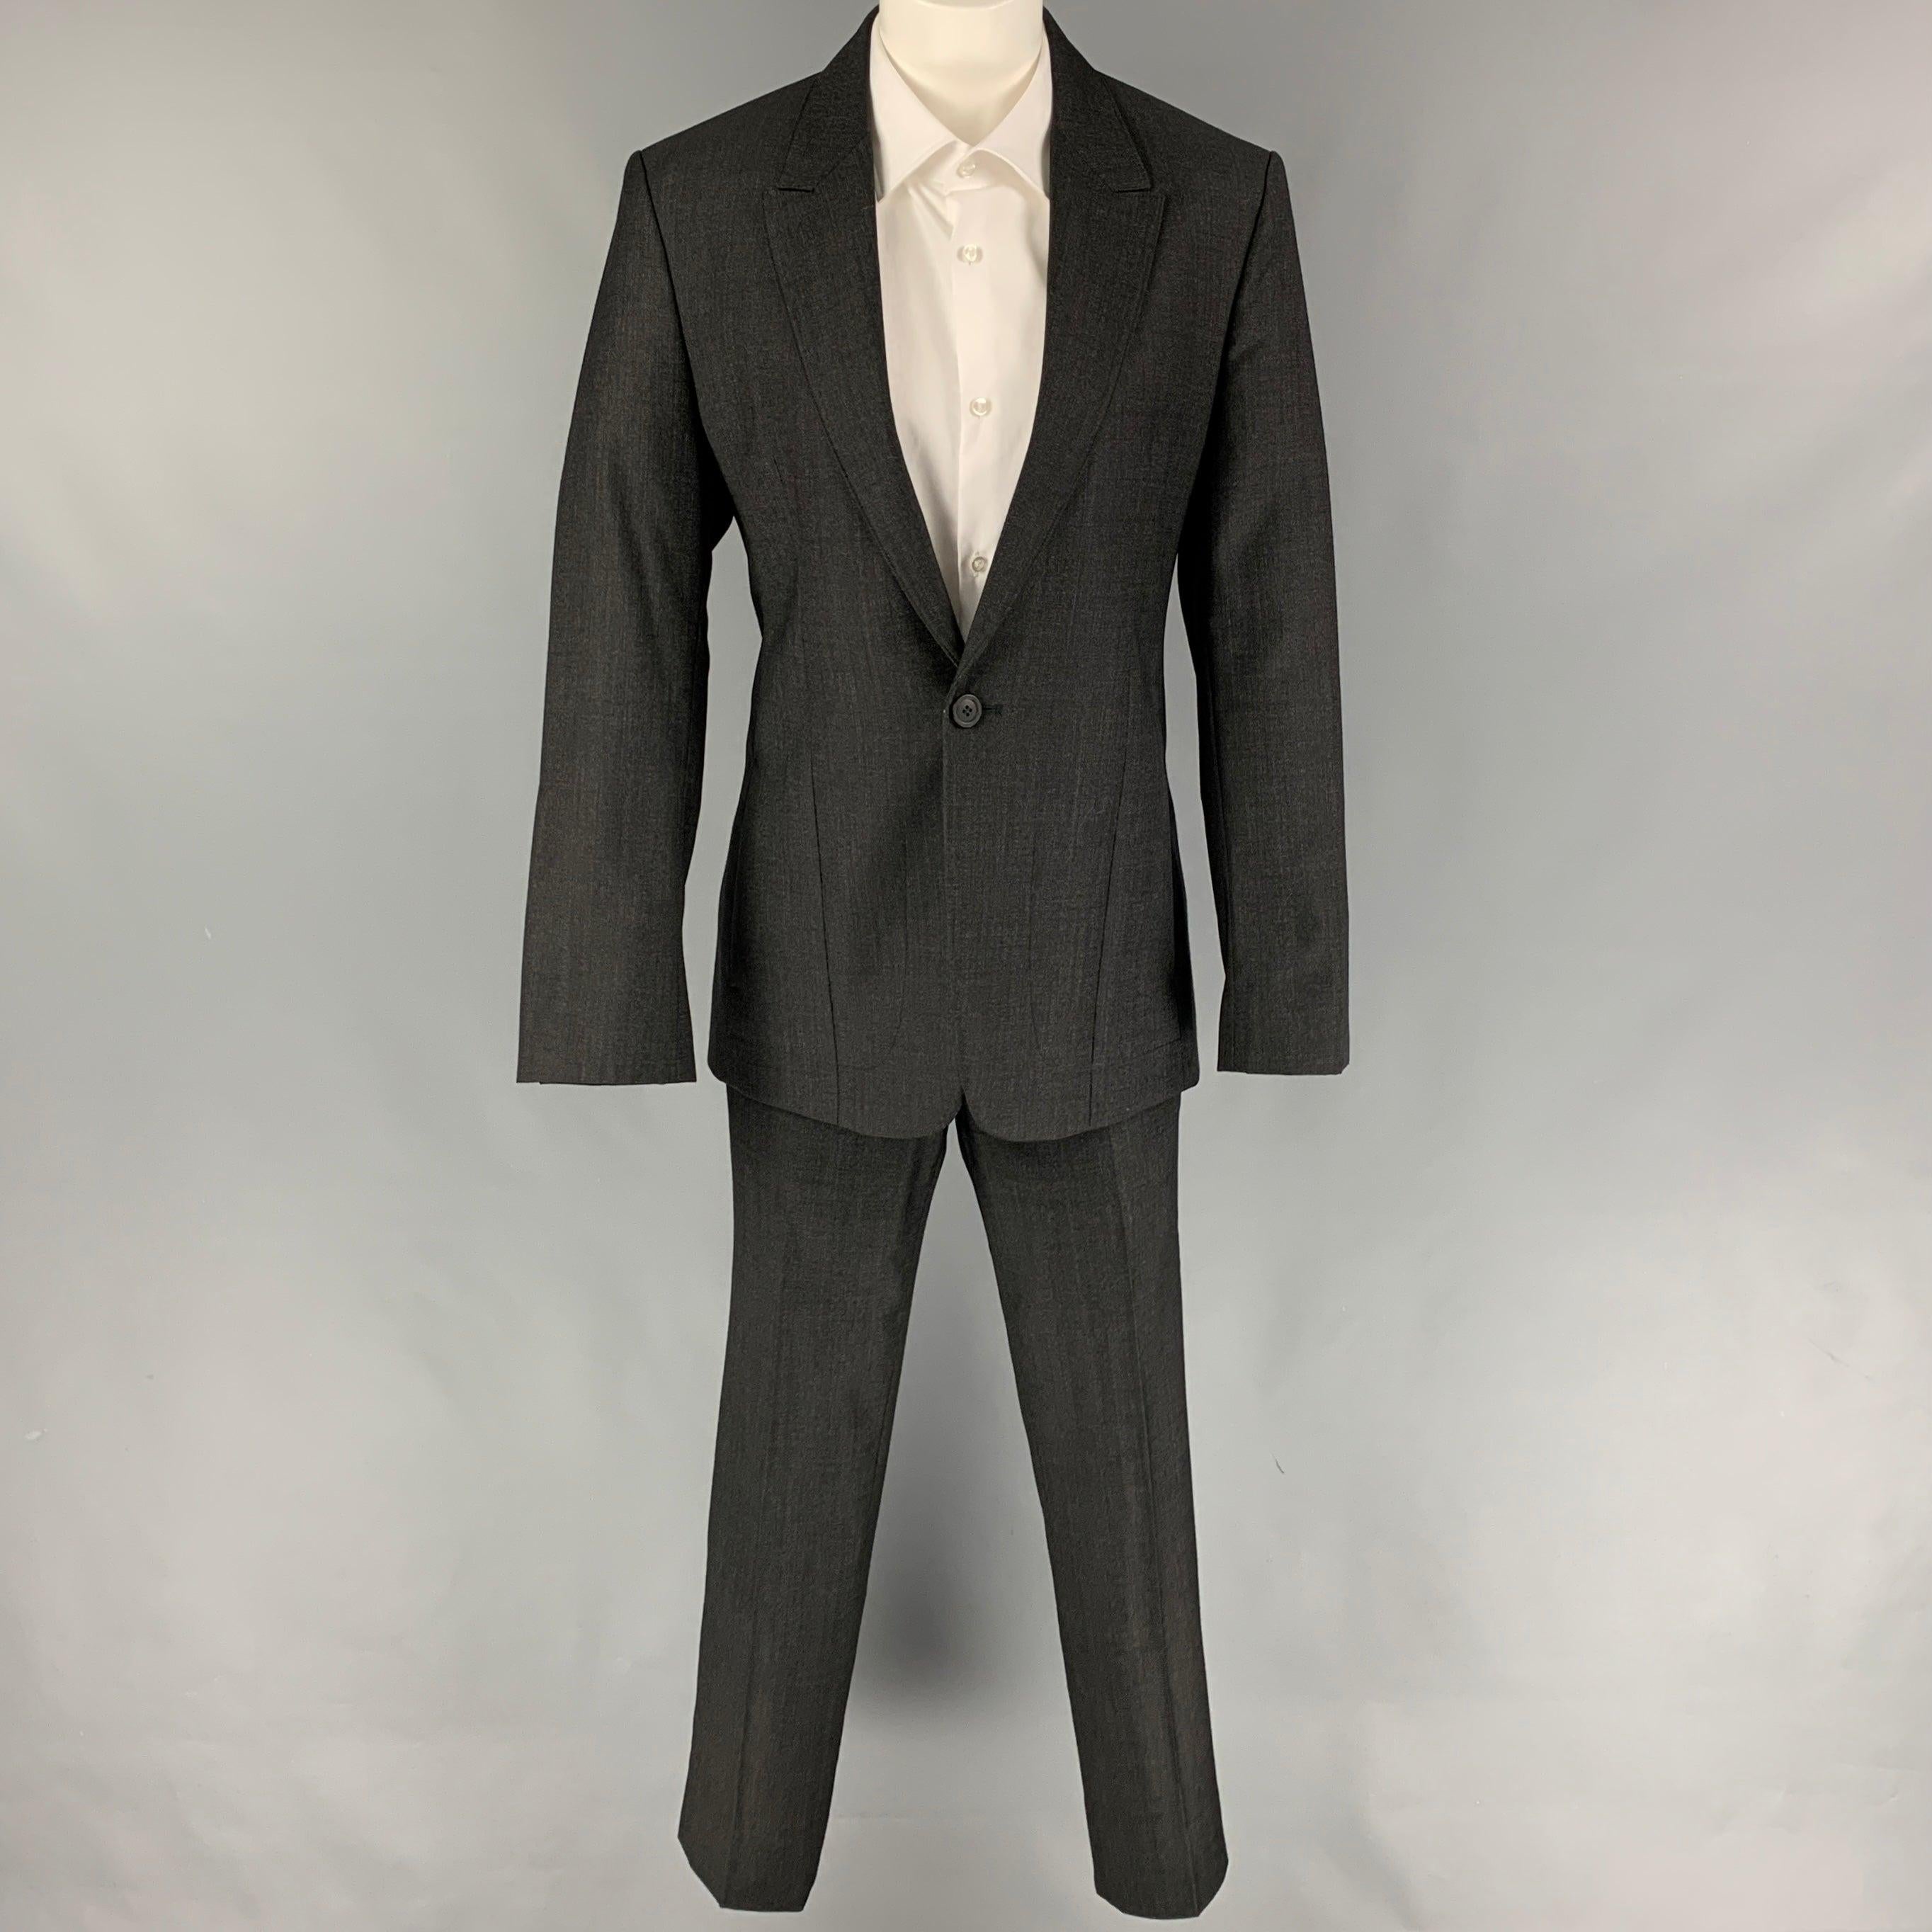 EMPORIO ARMANI
suit comes in a charcoal wool and includes a single breasted, single button sport coat with a peak lapel and matching flat front trousers. Made in Italy. Very Good Pre-Owned Condition. 

Marked:   46 

Measurements: 
 